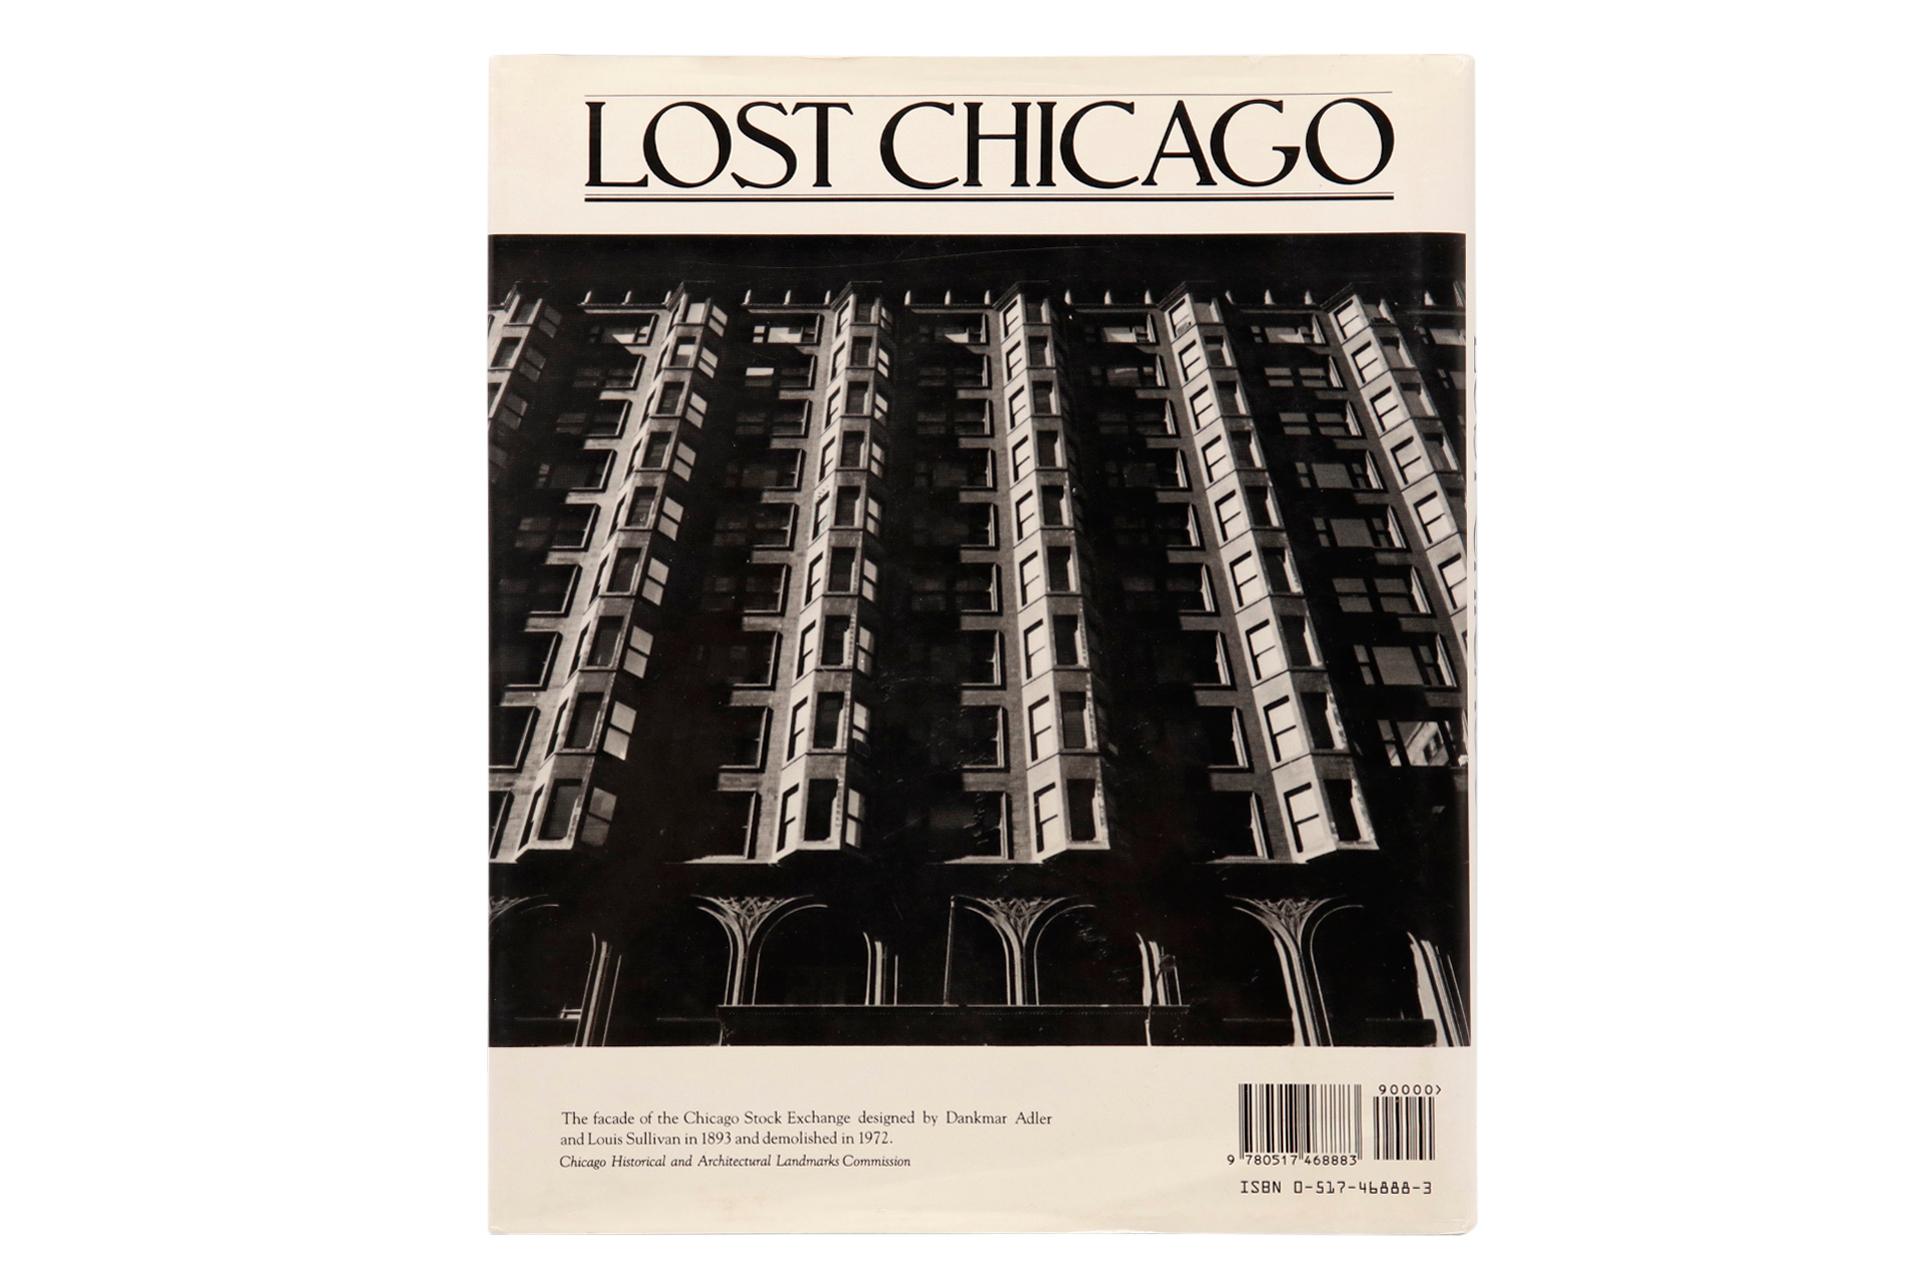 Lost Chicago by David Lowe. Illustrated with over 200 black and white photographs and prints. Hardcover book with dustjacket. Published in 1975 by Wings Books, a Random House Company. Manufactured in the United States. 241 pages.